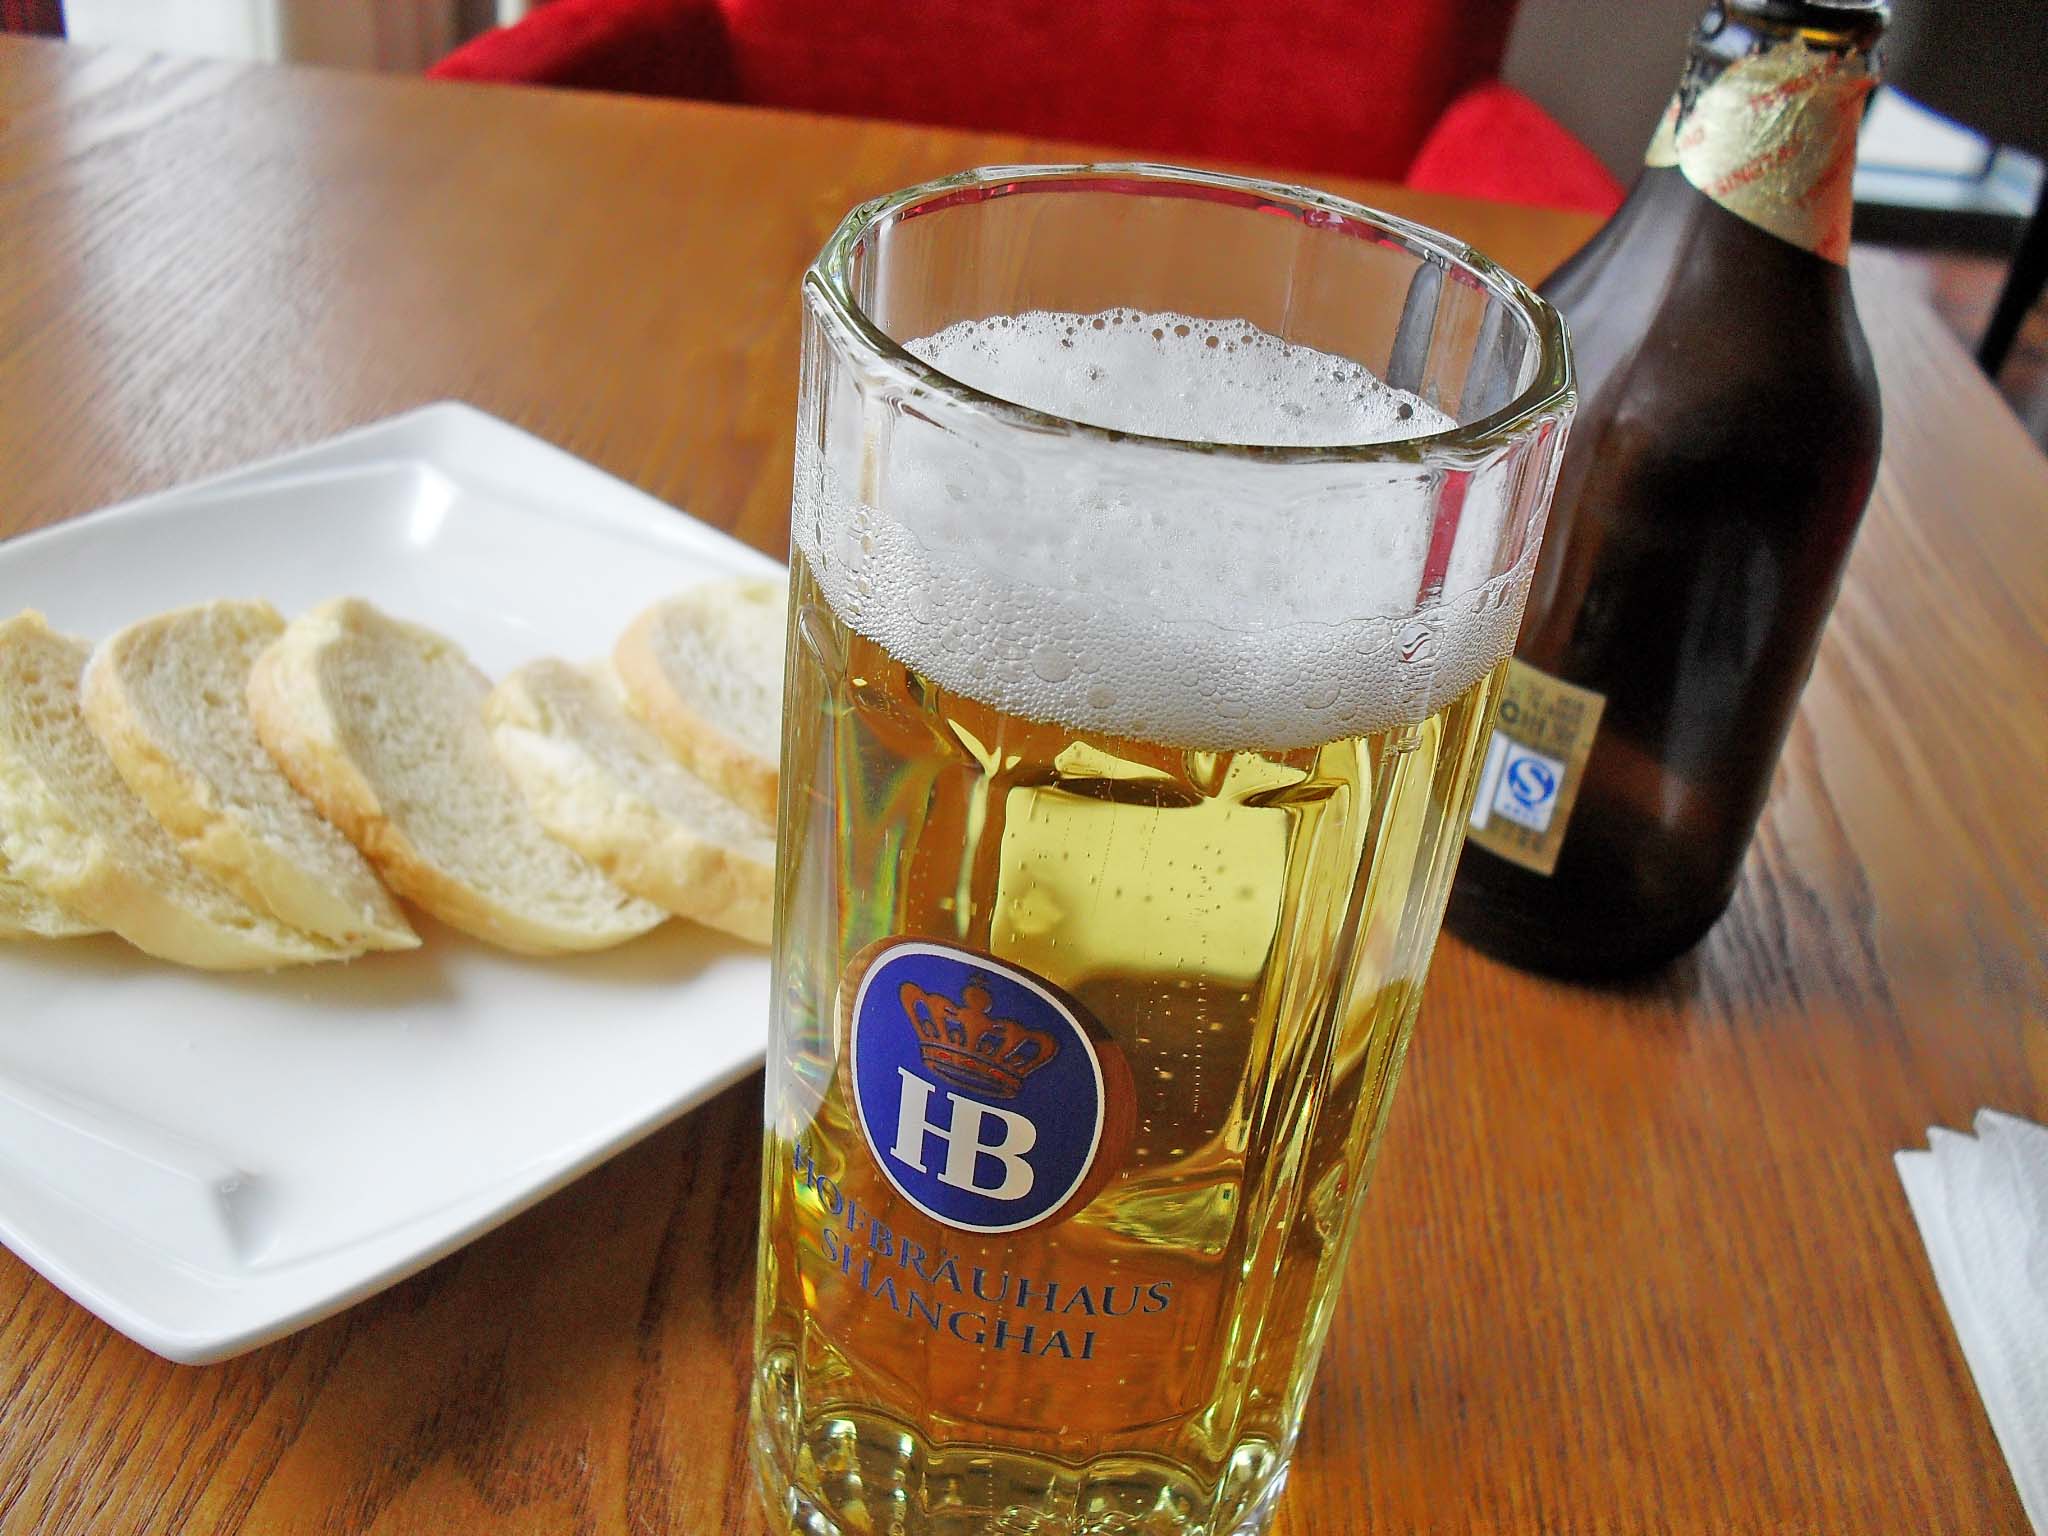 a plate with ers and a beer glass on a table